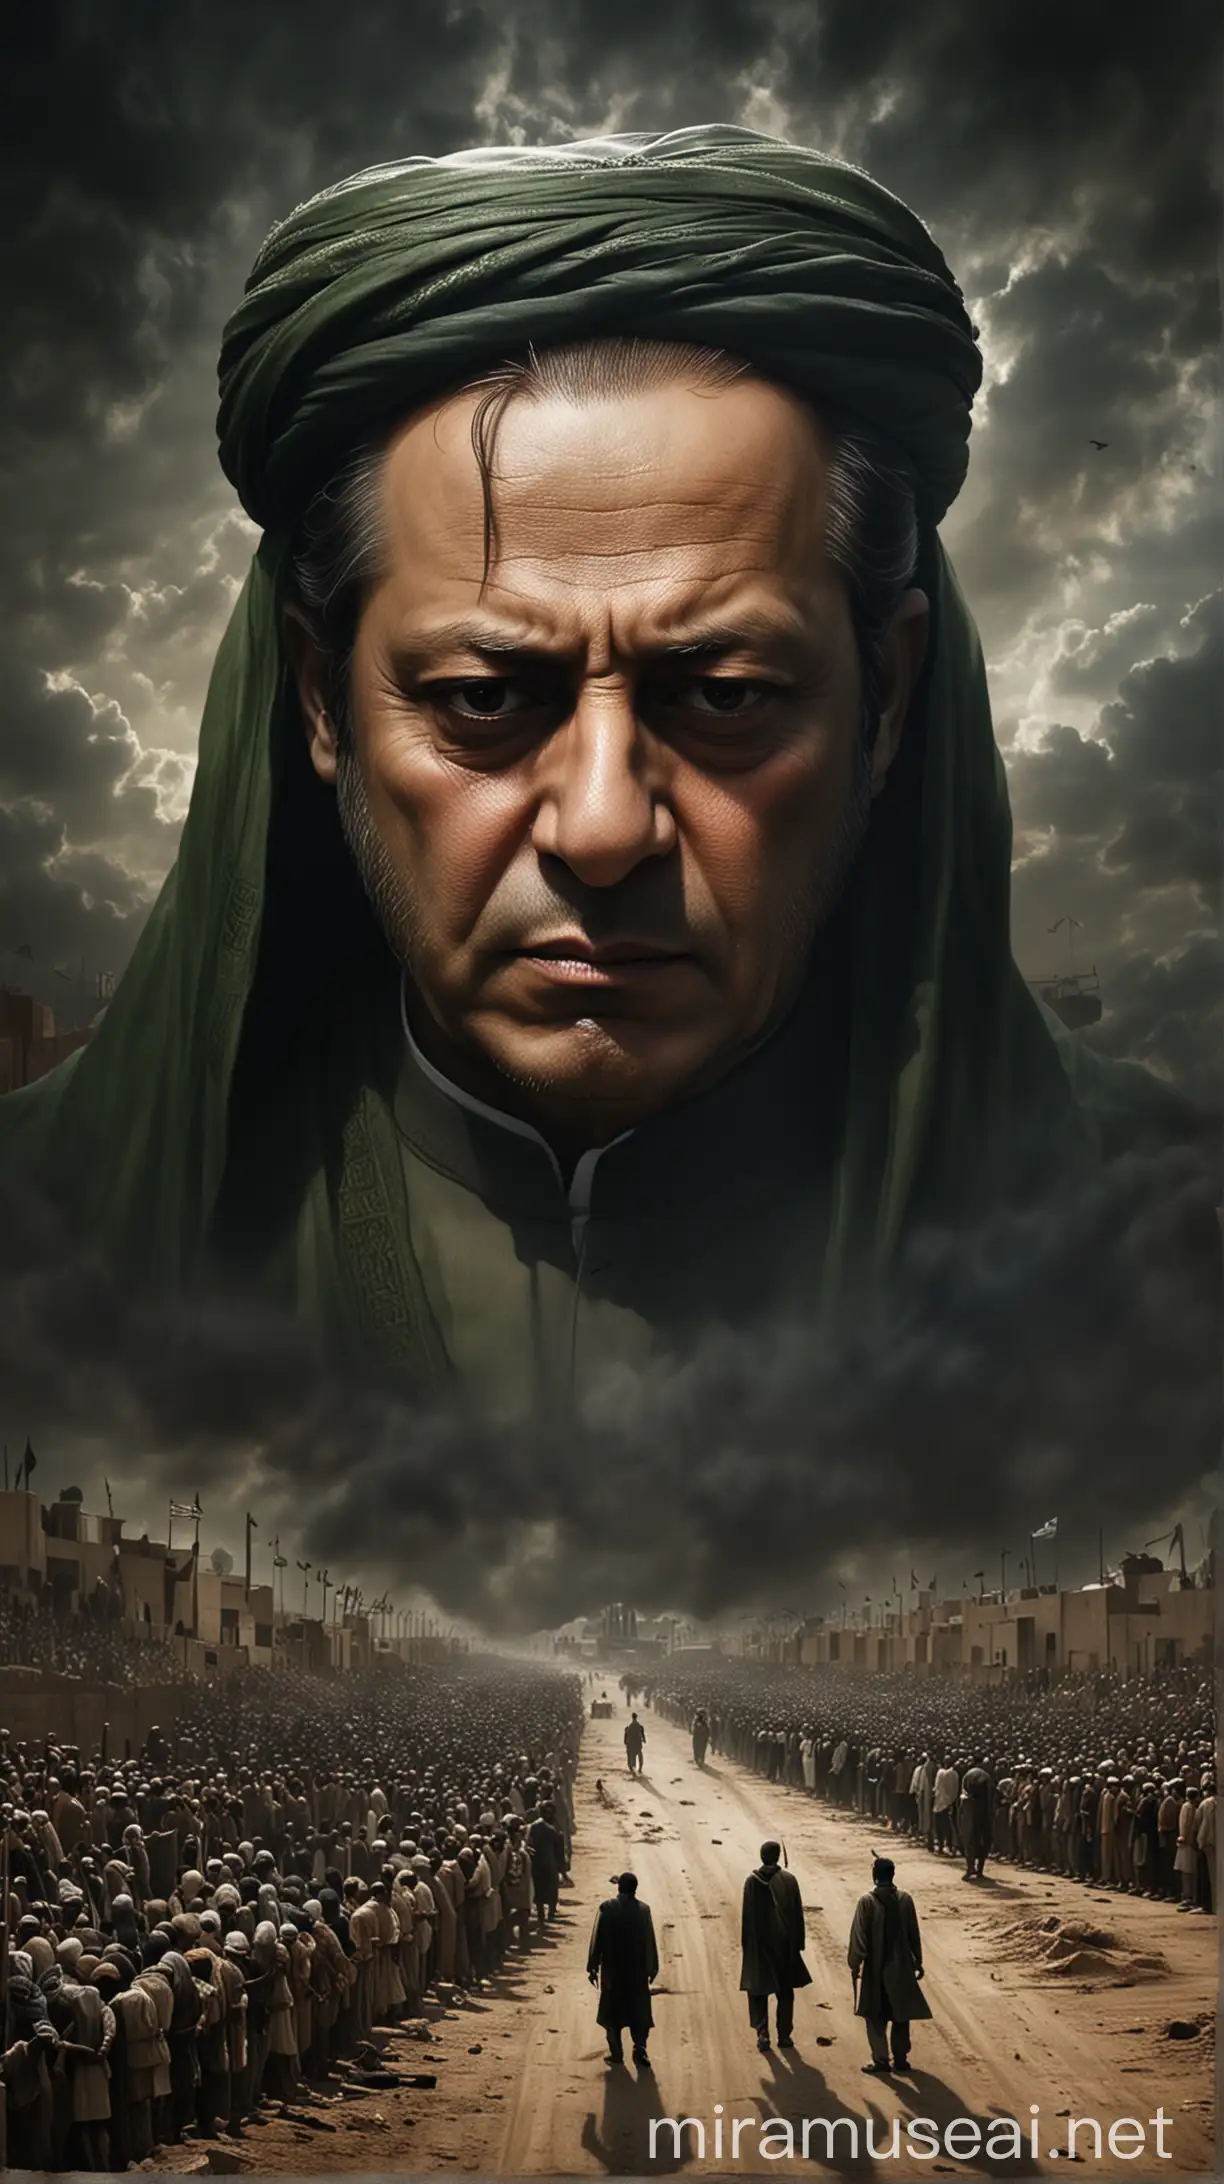 A haunting depiction of Sharif's legacy, with shadows looming ominously over his empire, symbolizing the fear and oppression that defined his reign. hyper realistic